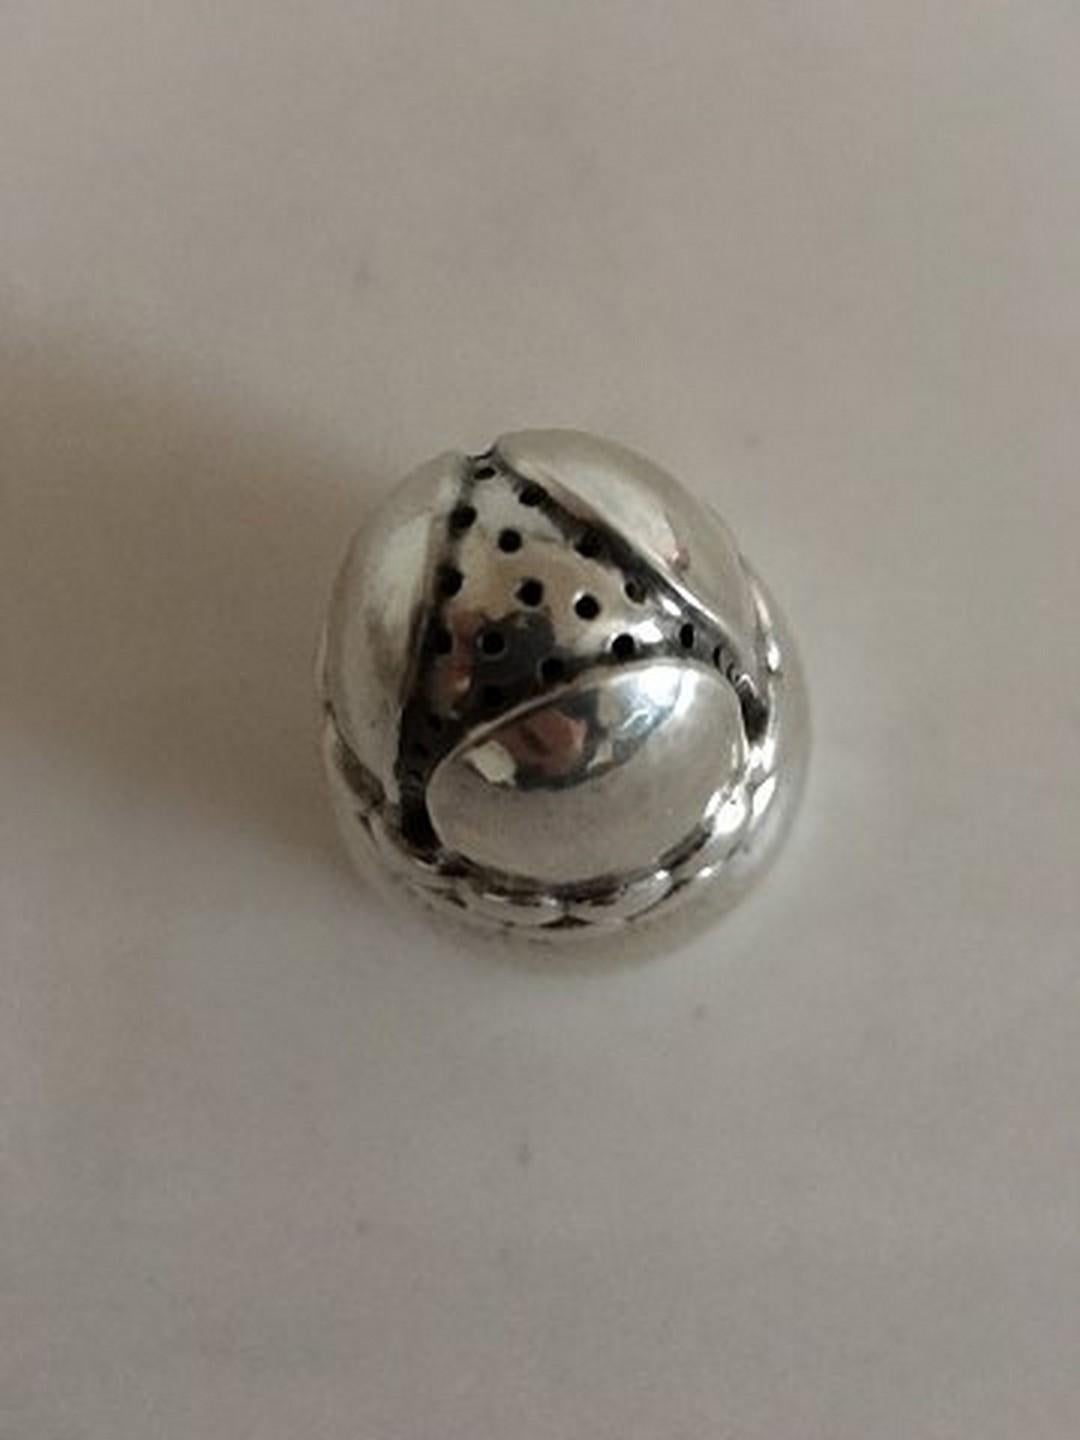 Art Nouveau Georg Jensen Silver Pepper Shaker No 5 Early Pepper Shaker in Nice Condition For Sale